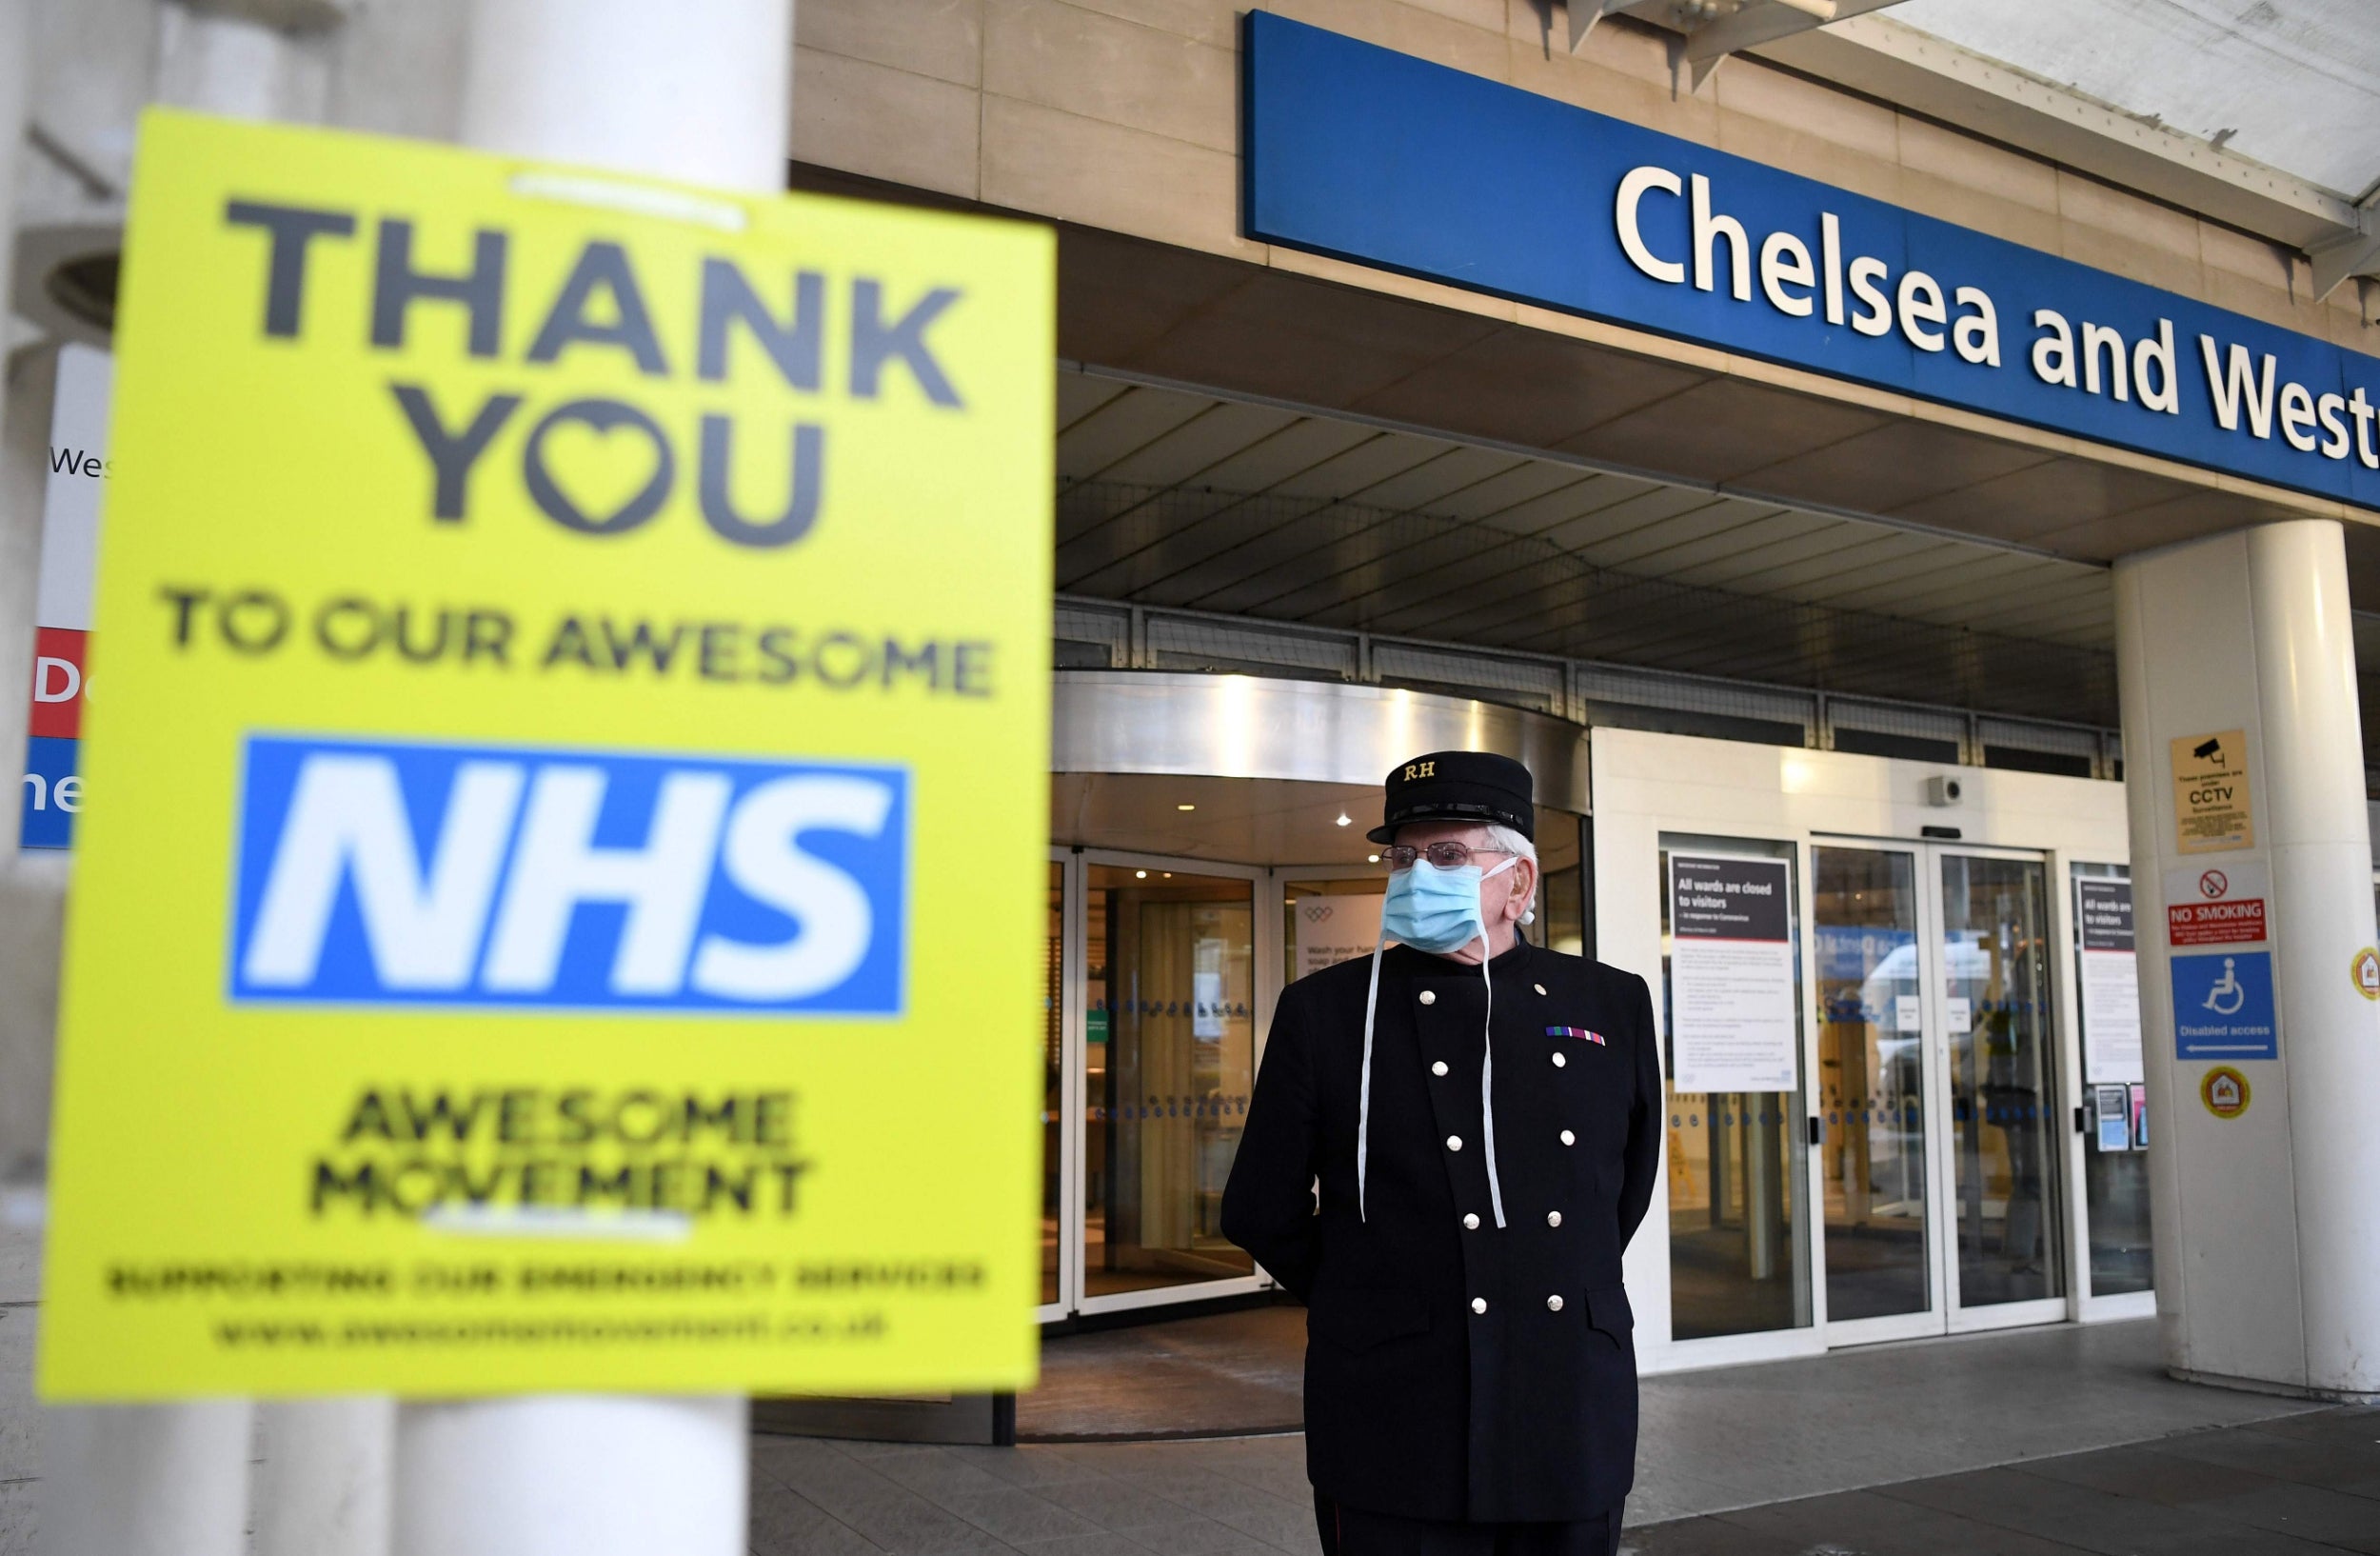 Chelsea and Westminster Hospital in London